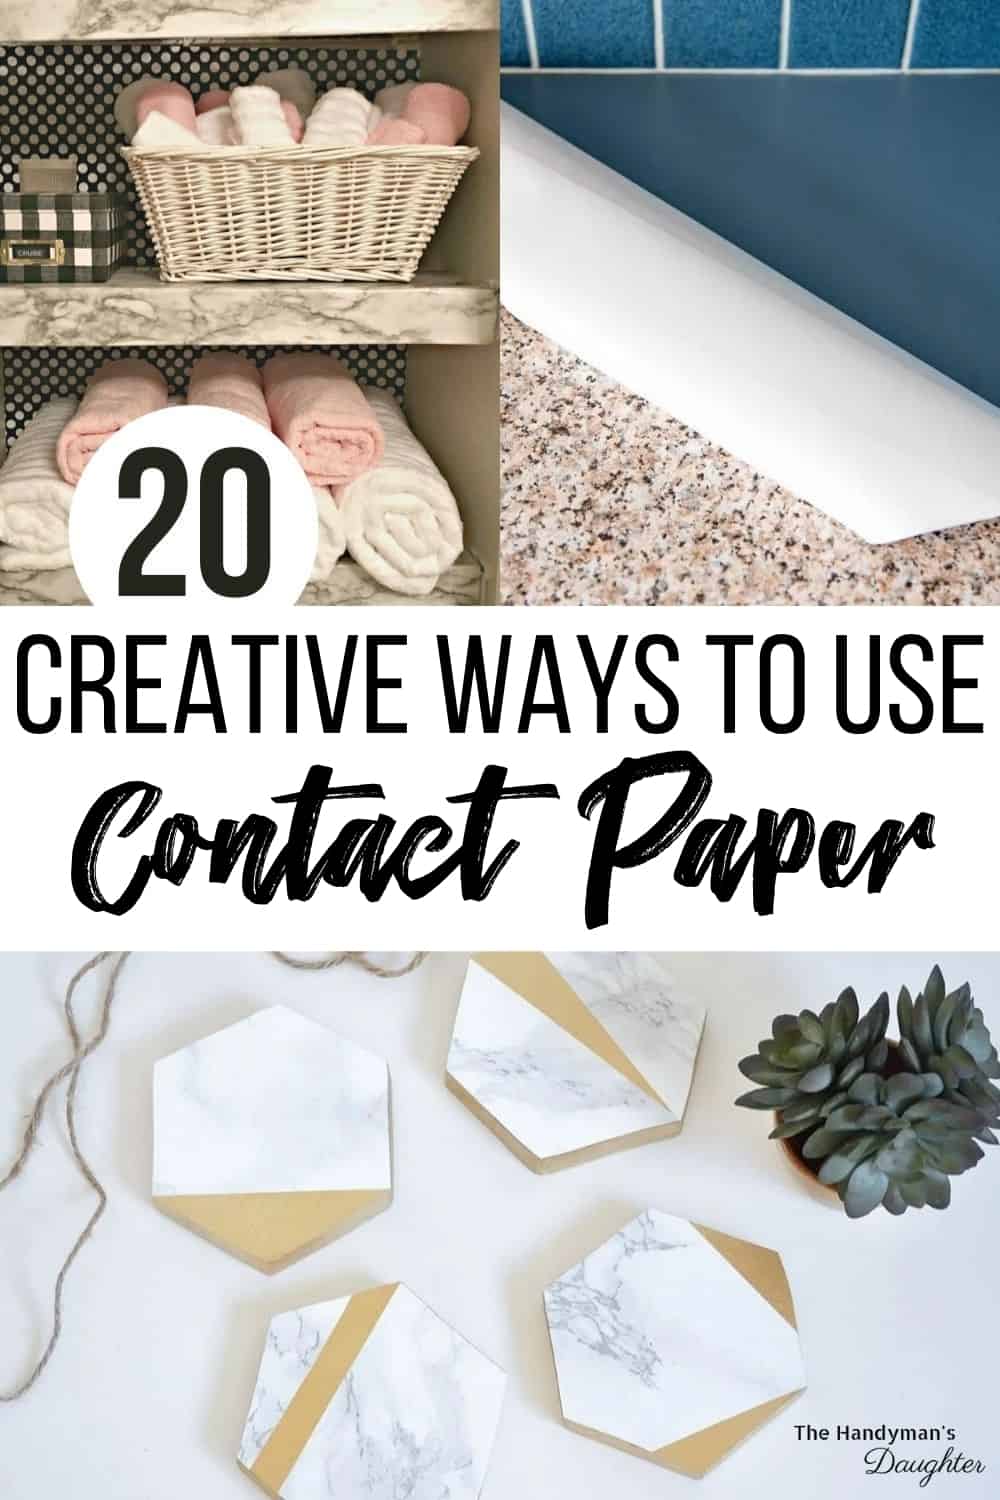 DIY: How To Easily Install Contact Paper 